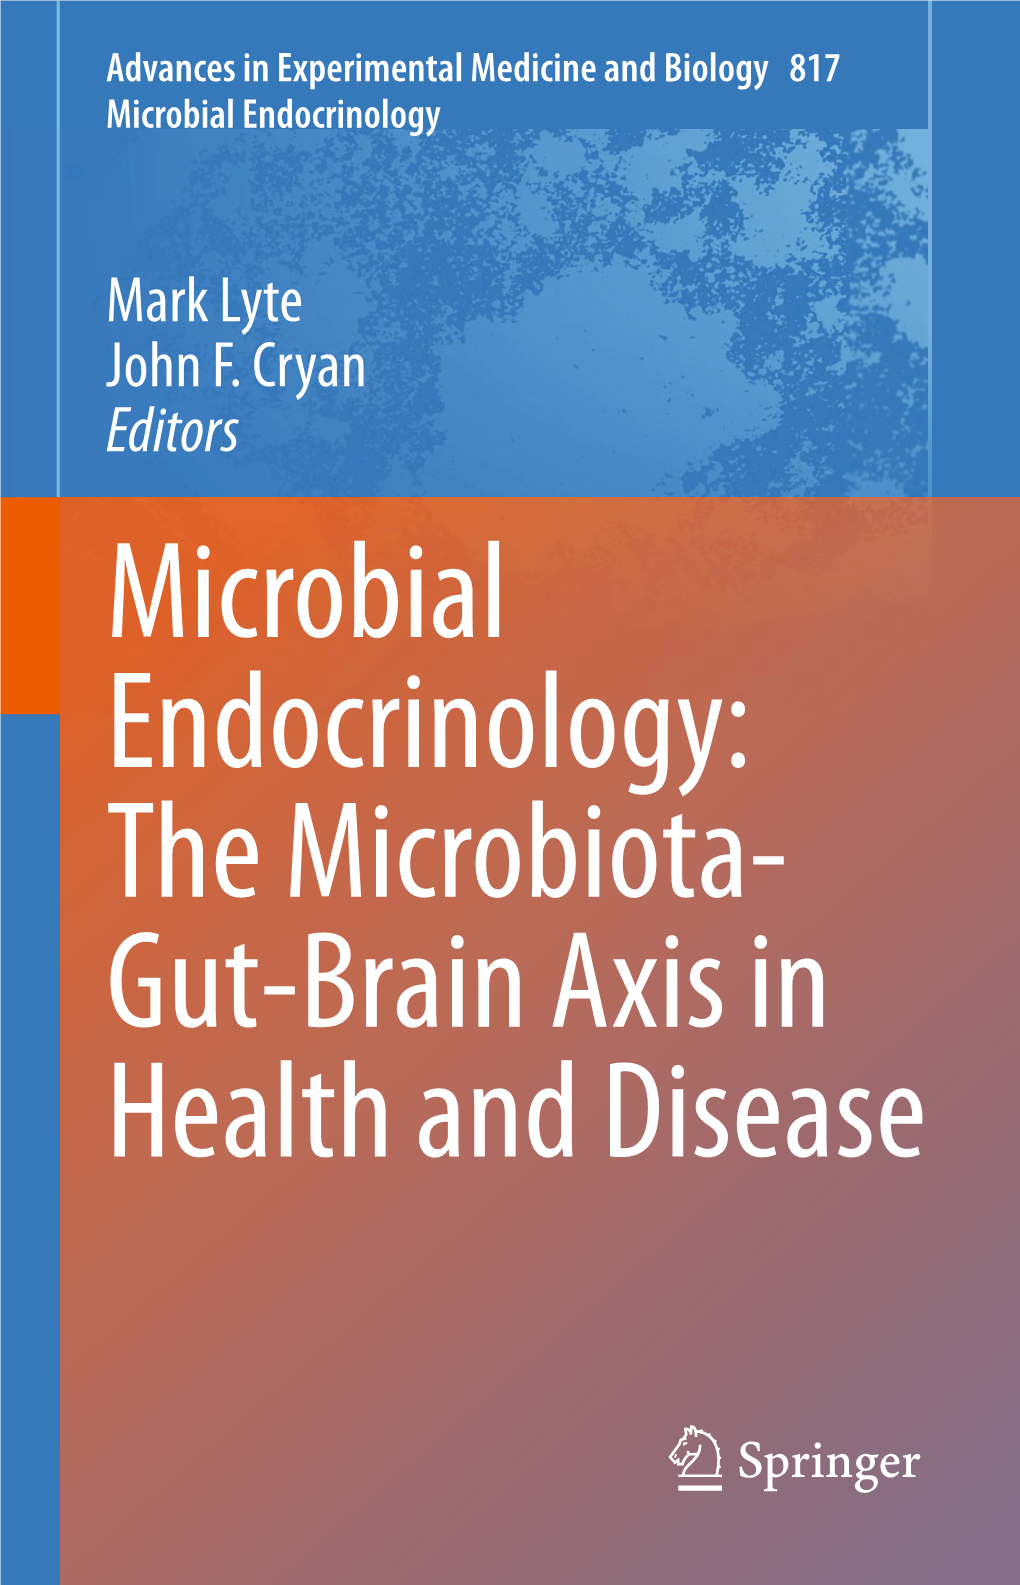 The Microbiota- Gut-Brain Axis in Health and Disease Advances in Experimental Medicine and Biology